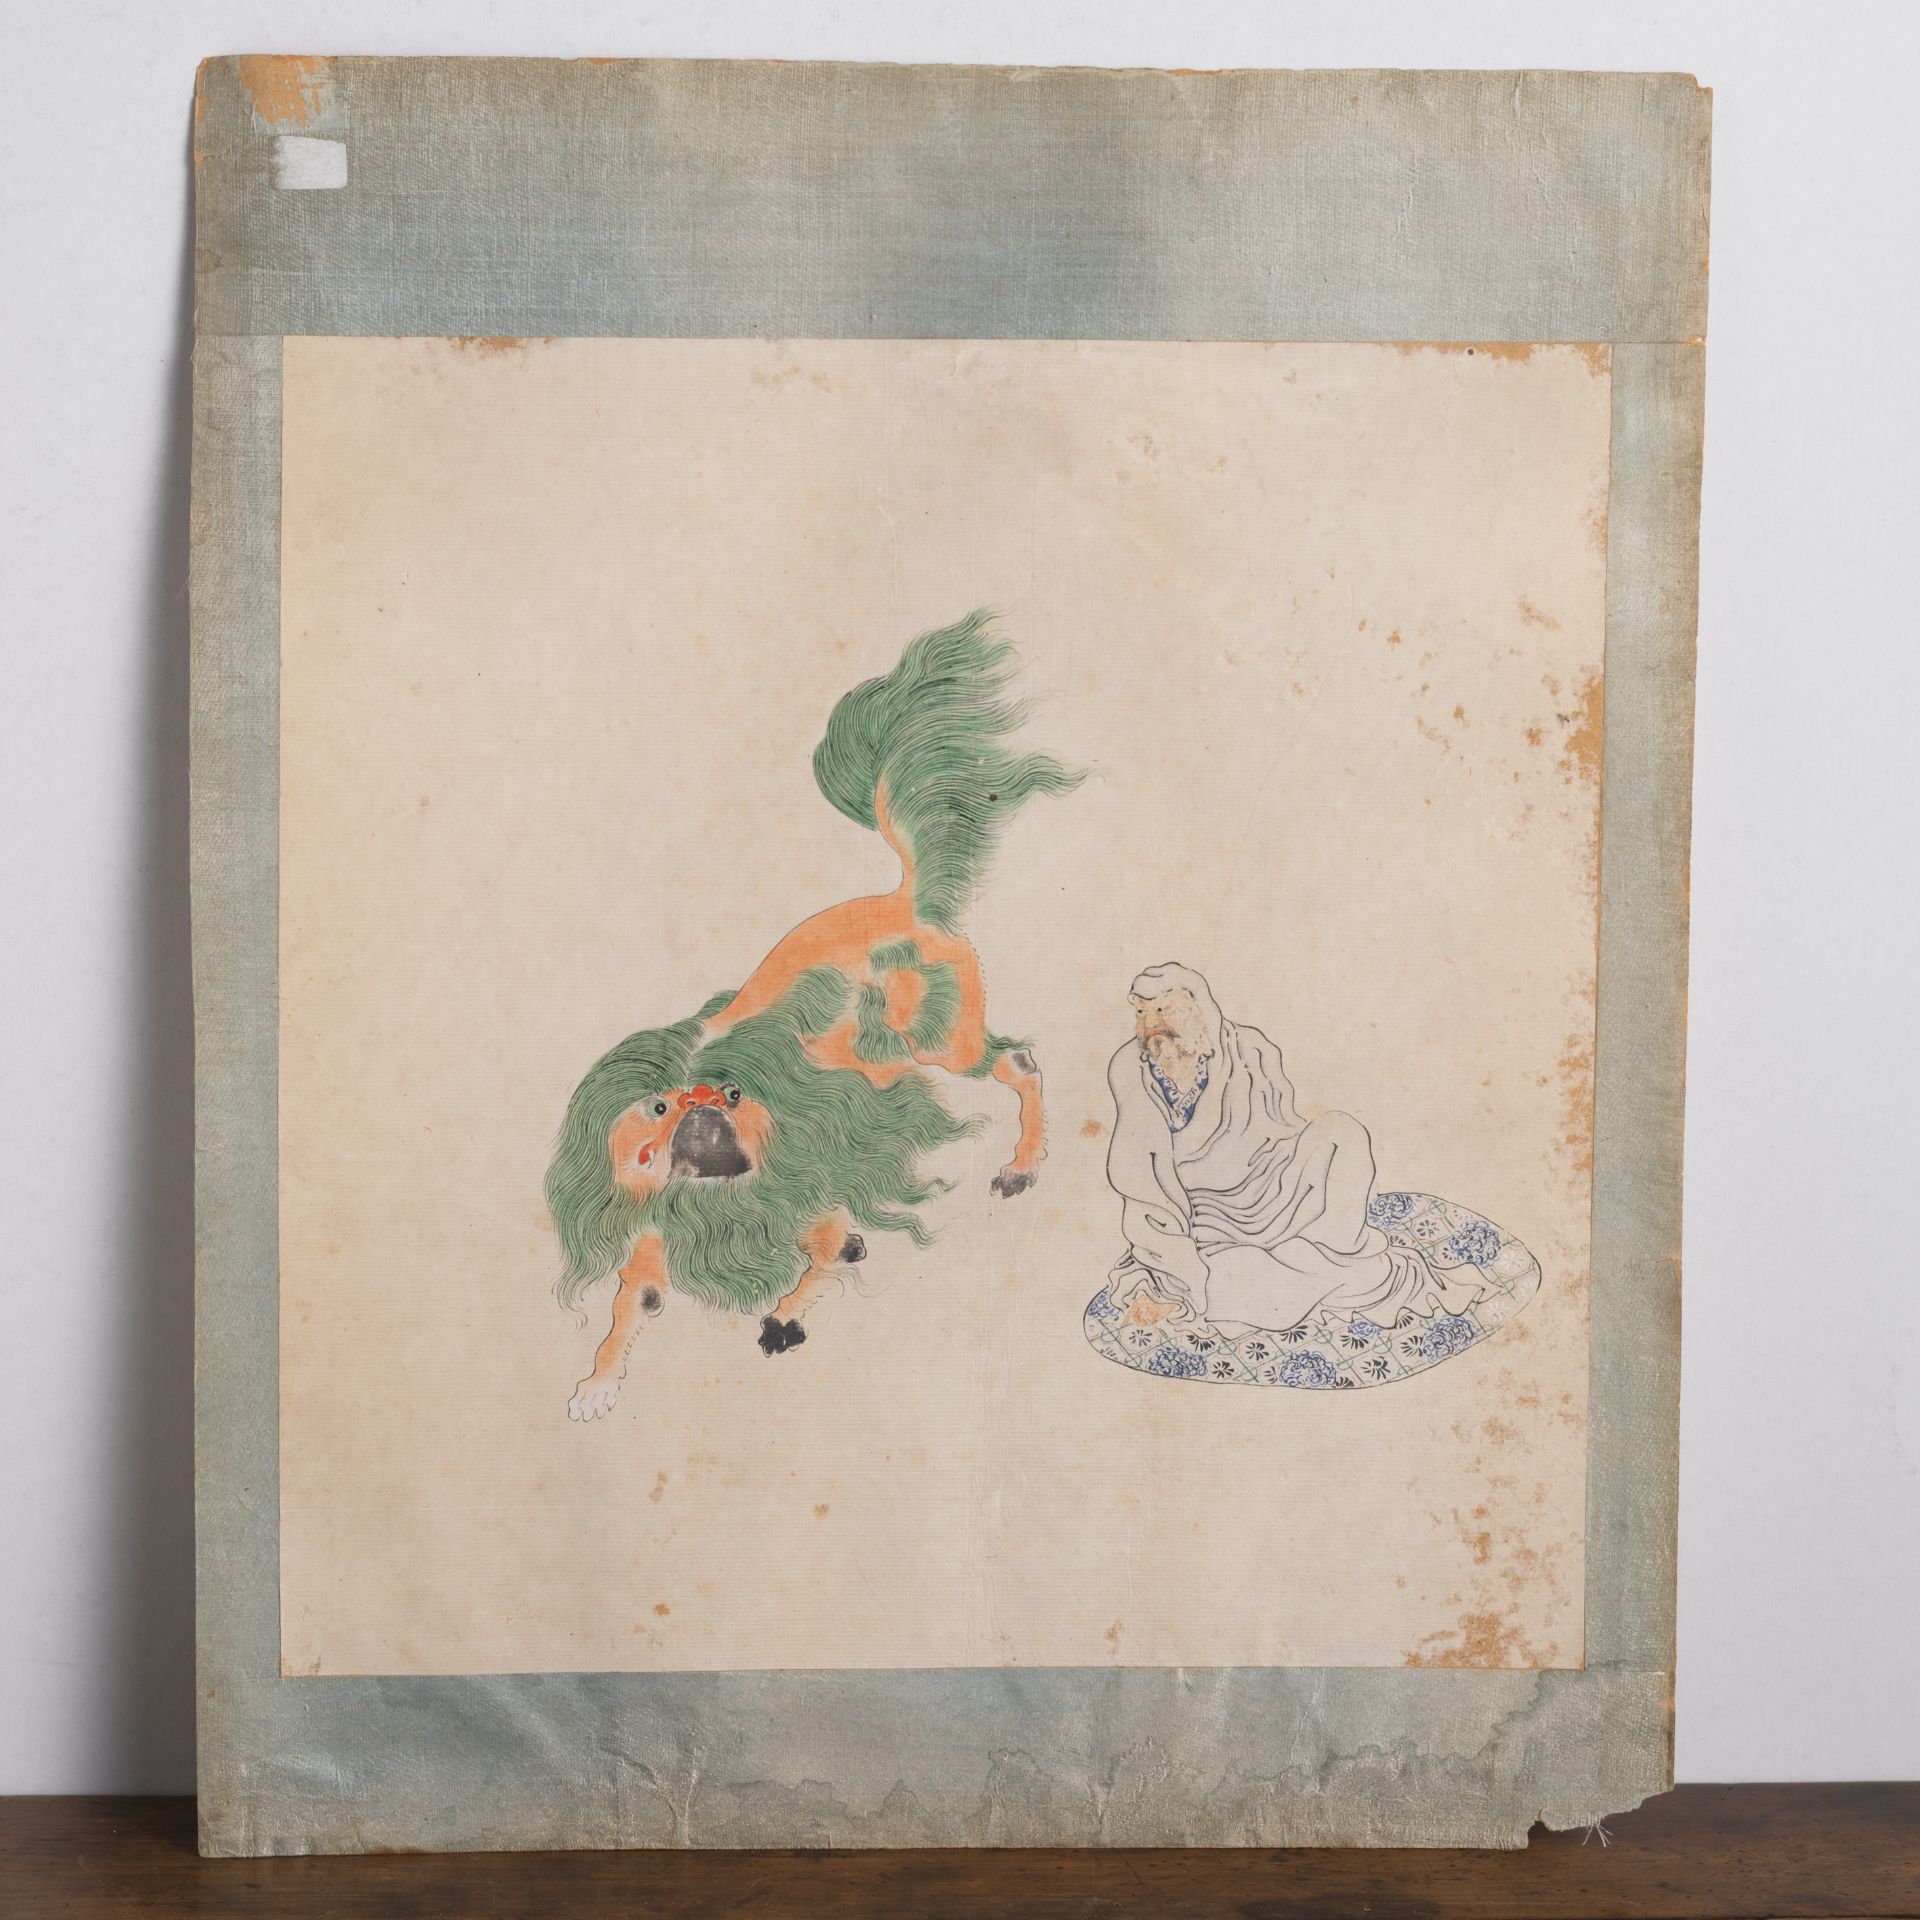 THREE ALBUM LEAVES WITH PAINTINGS OF LUOHAN AND MYTHICAL BEASTS - Image 2 of 4